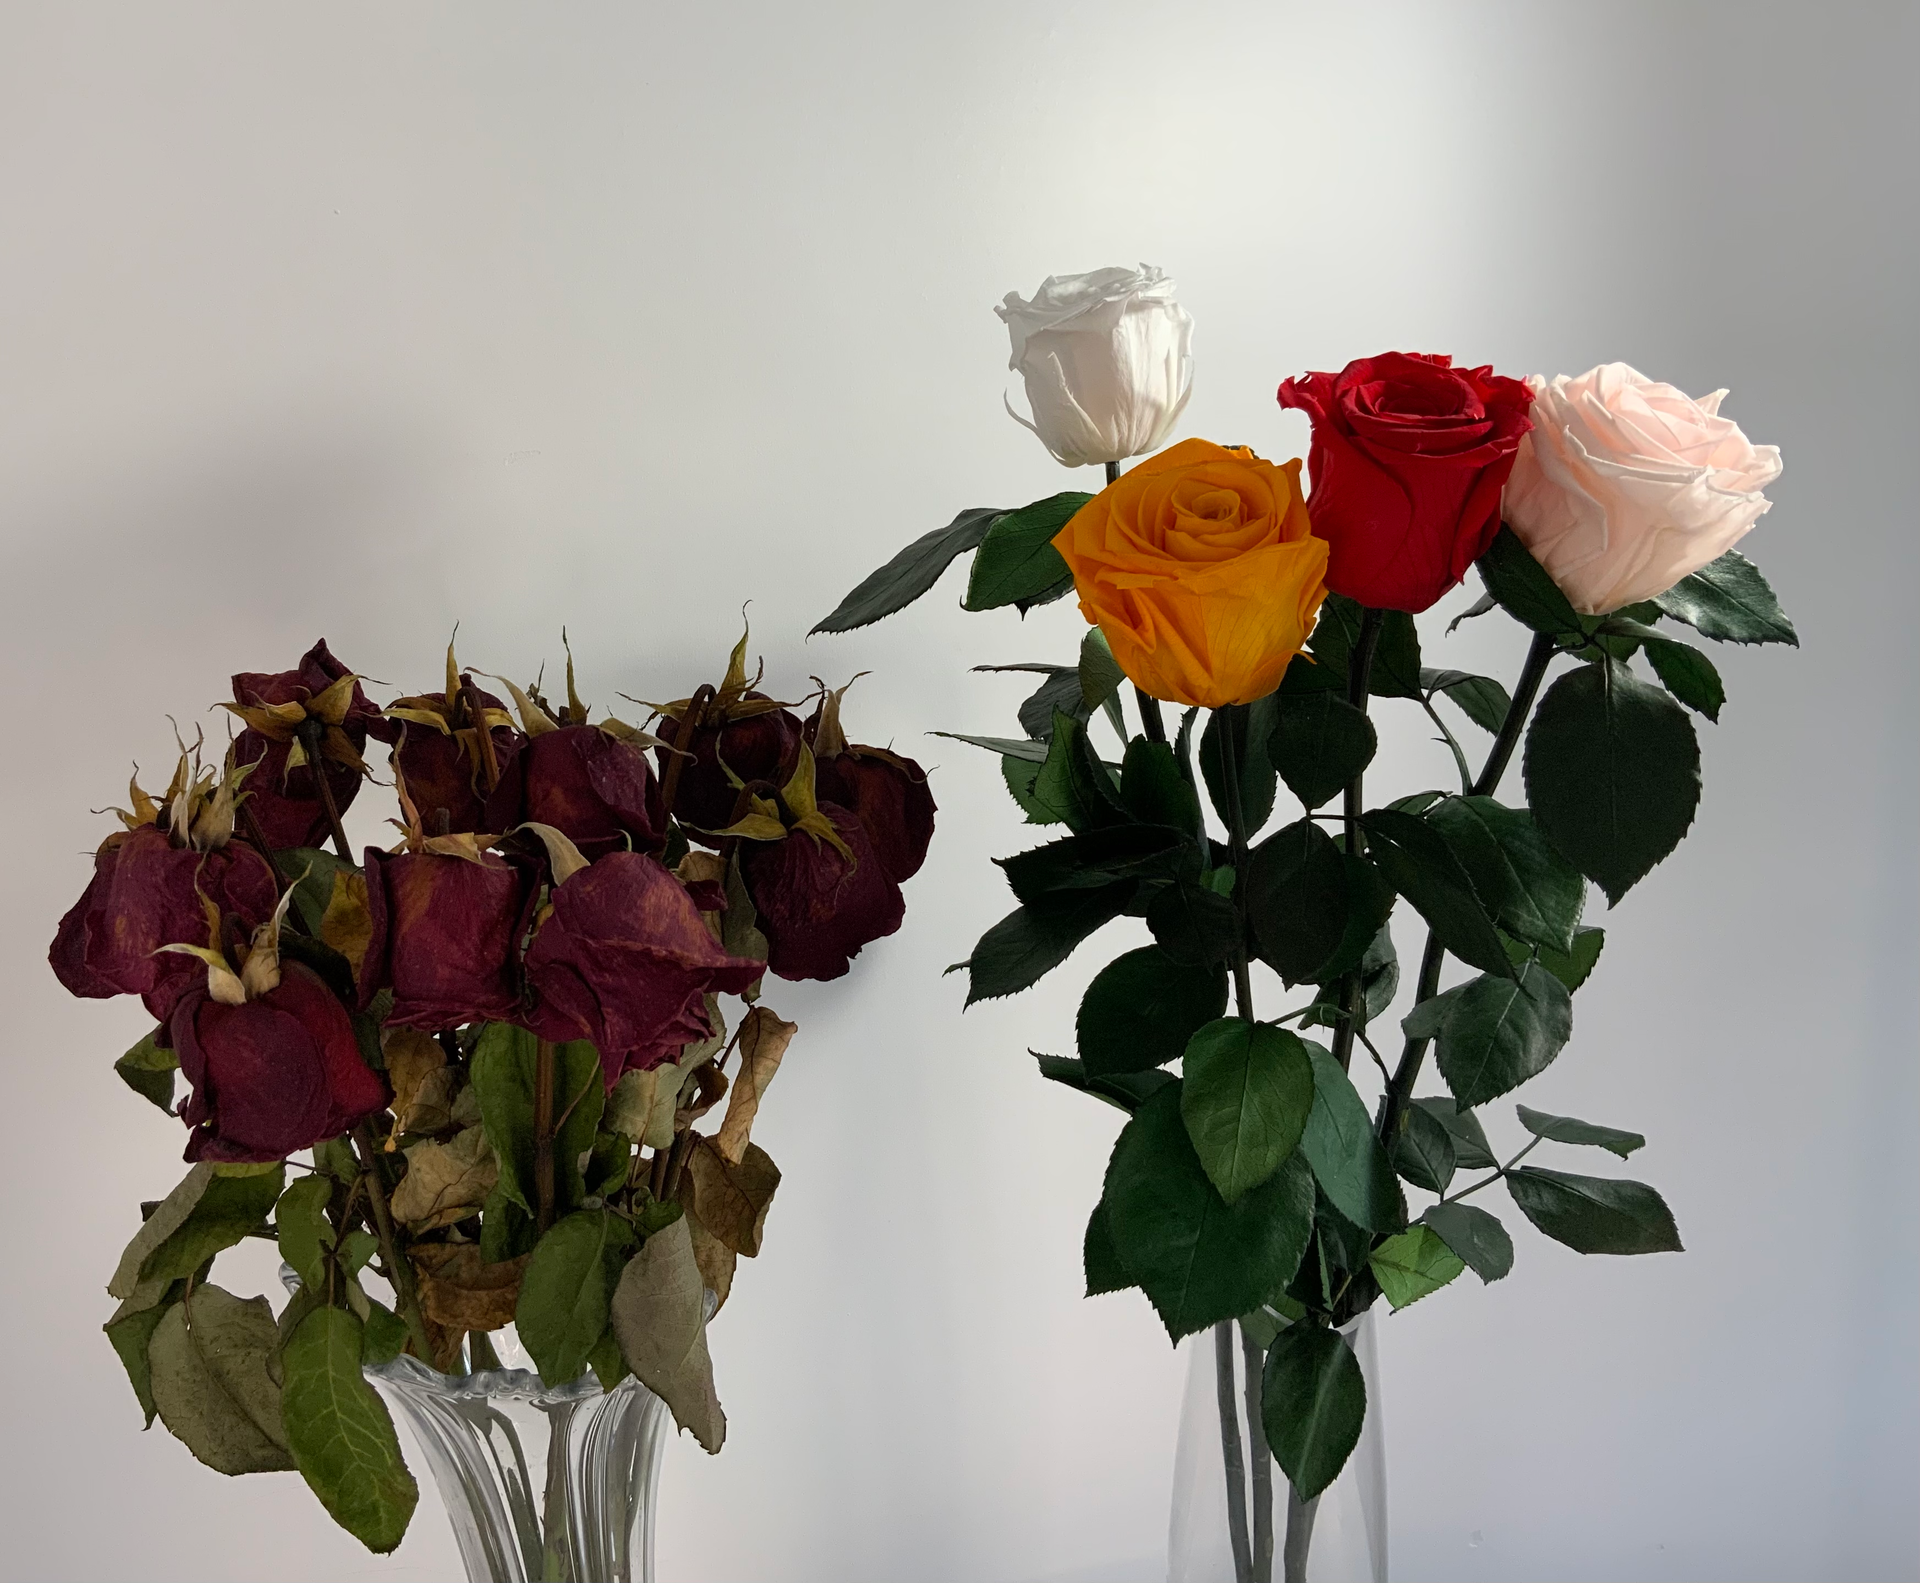 Load video: Video showing fresh-cut roses next to our eternal roses. This 2 week time-lapse shows fresh how roses wilt while eternal roses remain looking fresh.